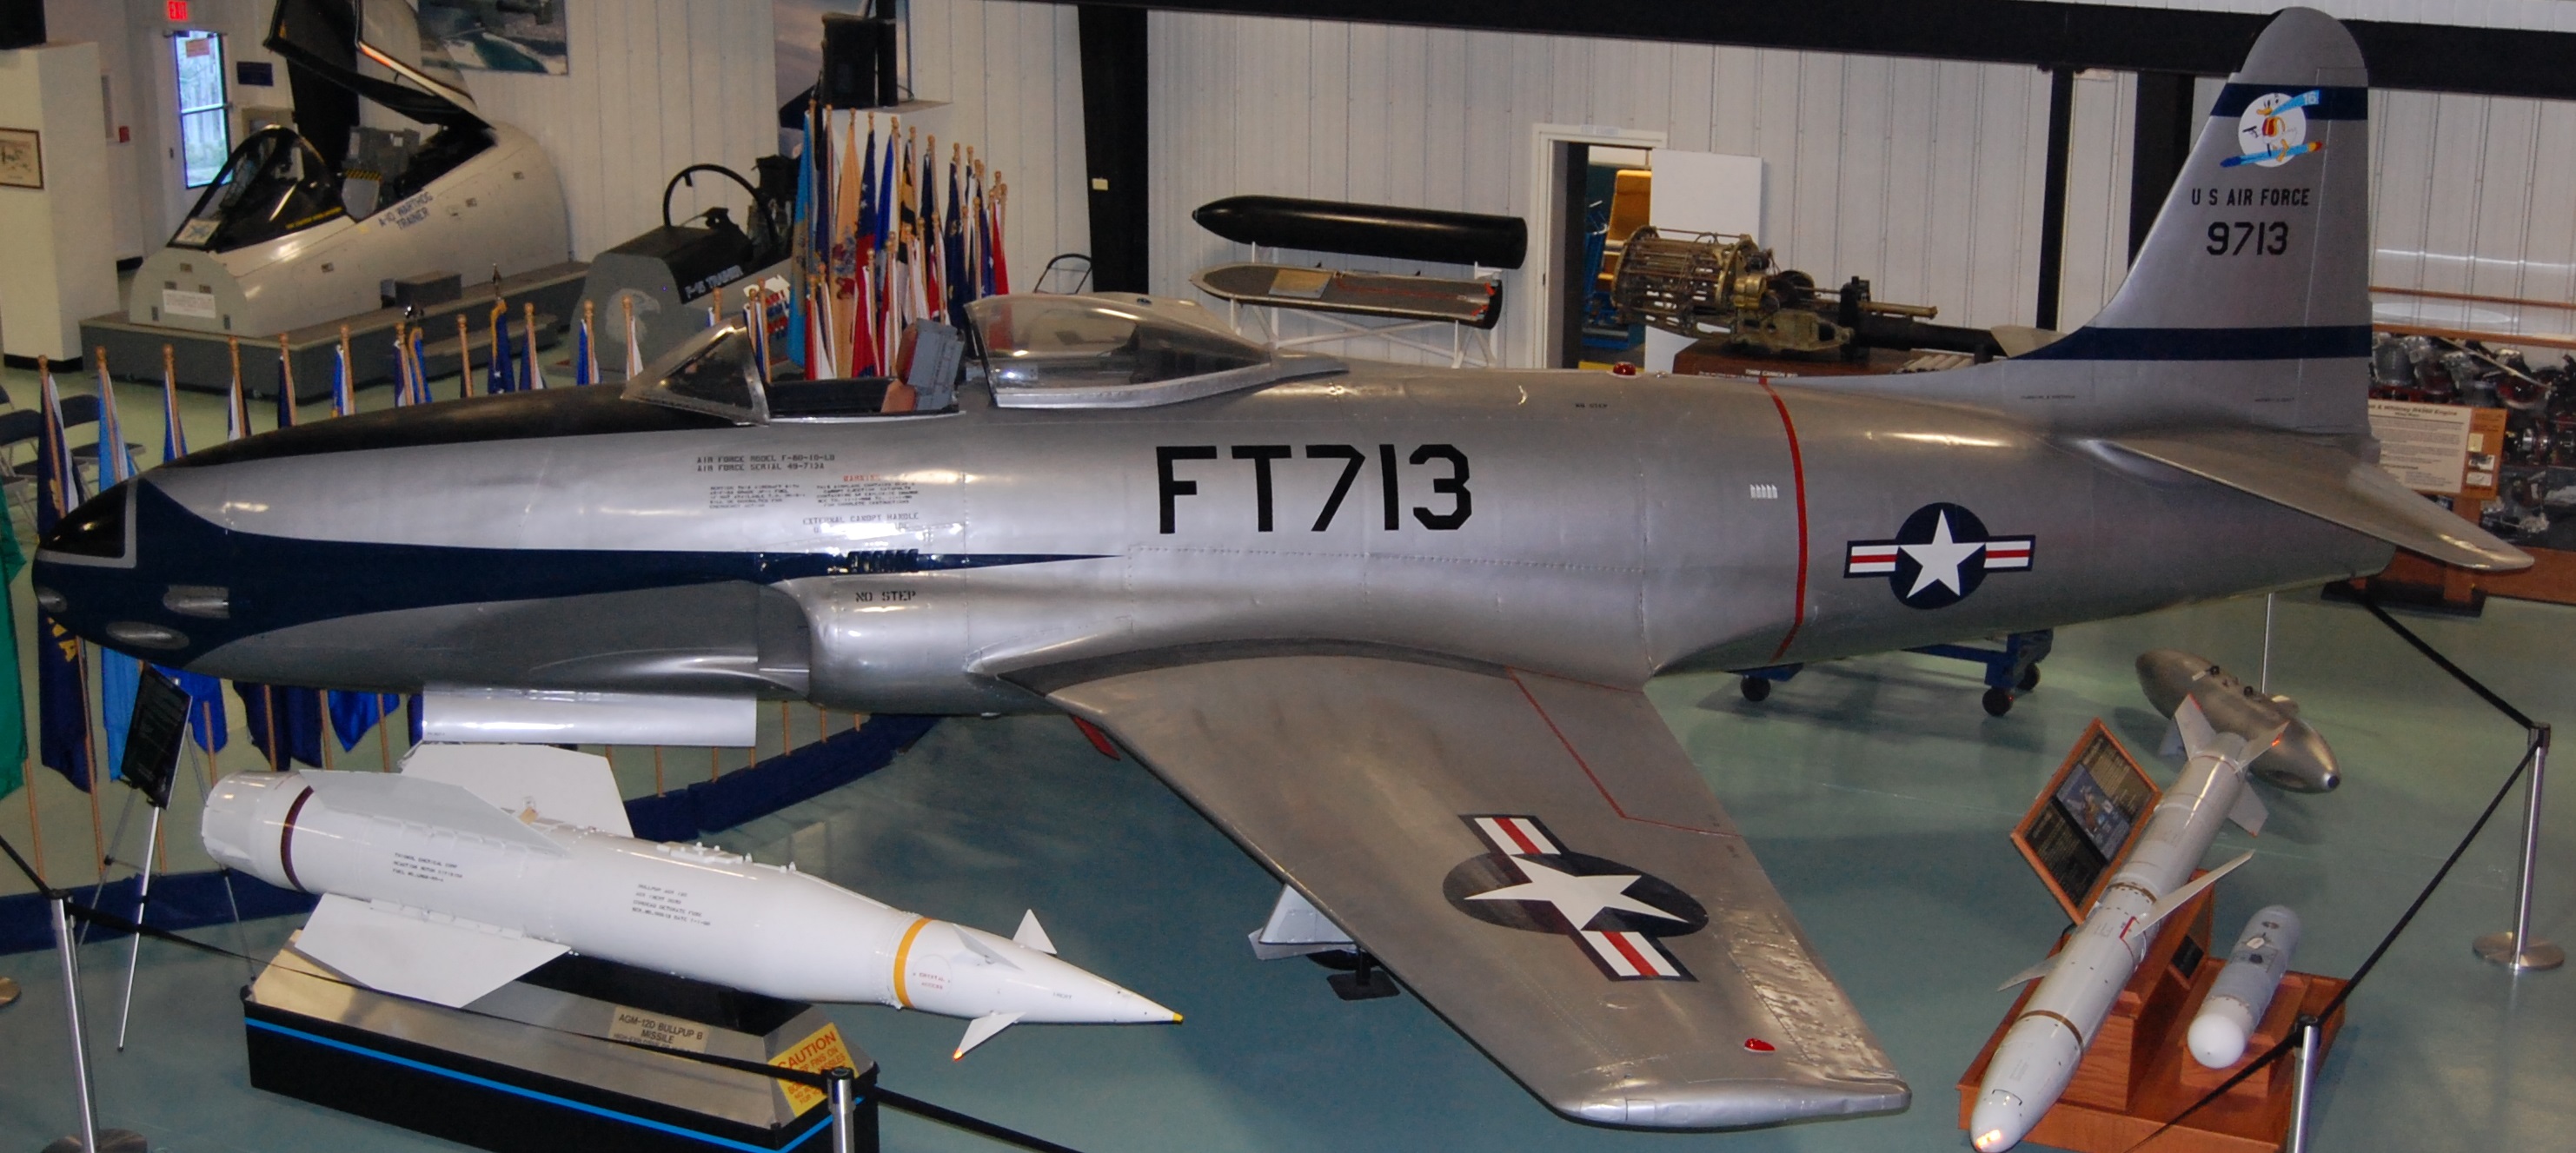 A Lockheed F-80C Shooting Star on display at the Air Force Armaments Museum, Eglin Air Force Base, Florida. The fighter is marked as F-80C-10-LO 49-713, 16th Fighter Squadron, 51st Fighter Interceptor Group, Kimpo, Korea, 1950.